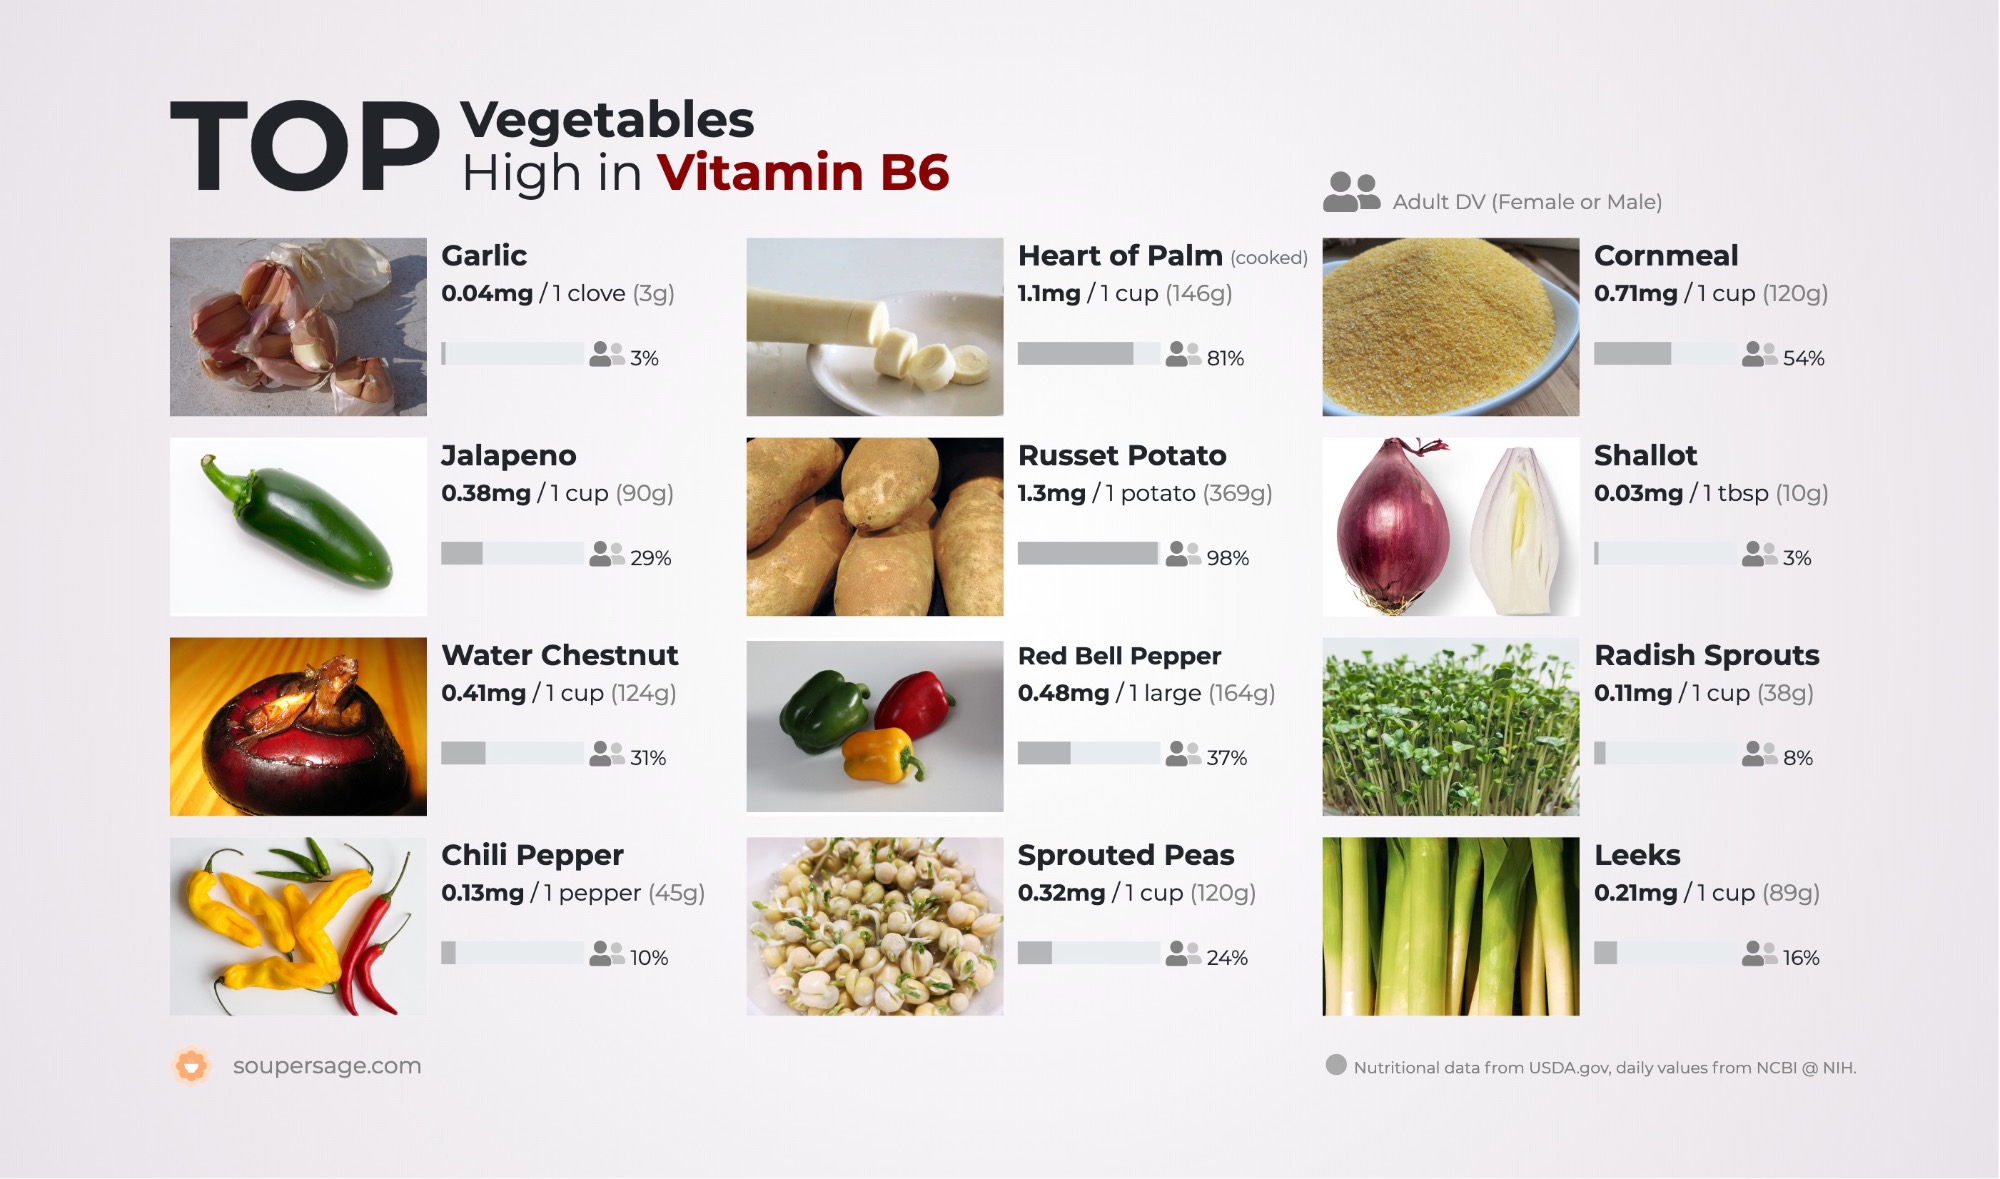 image of Top Vegetables High in Vitamin B6